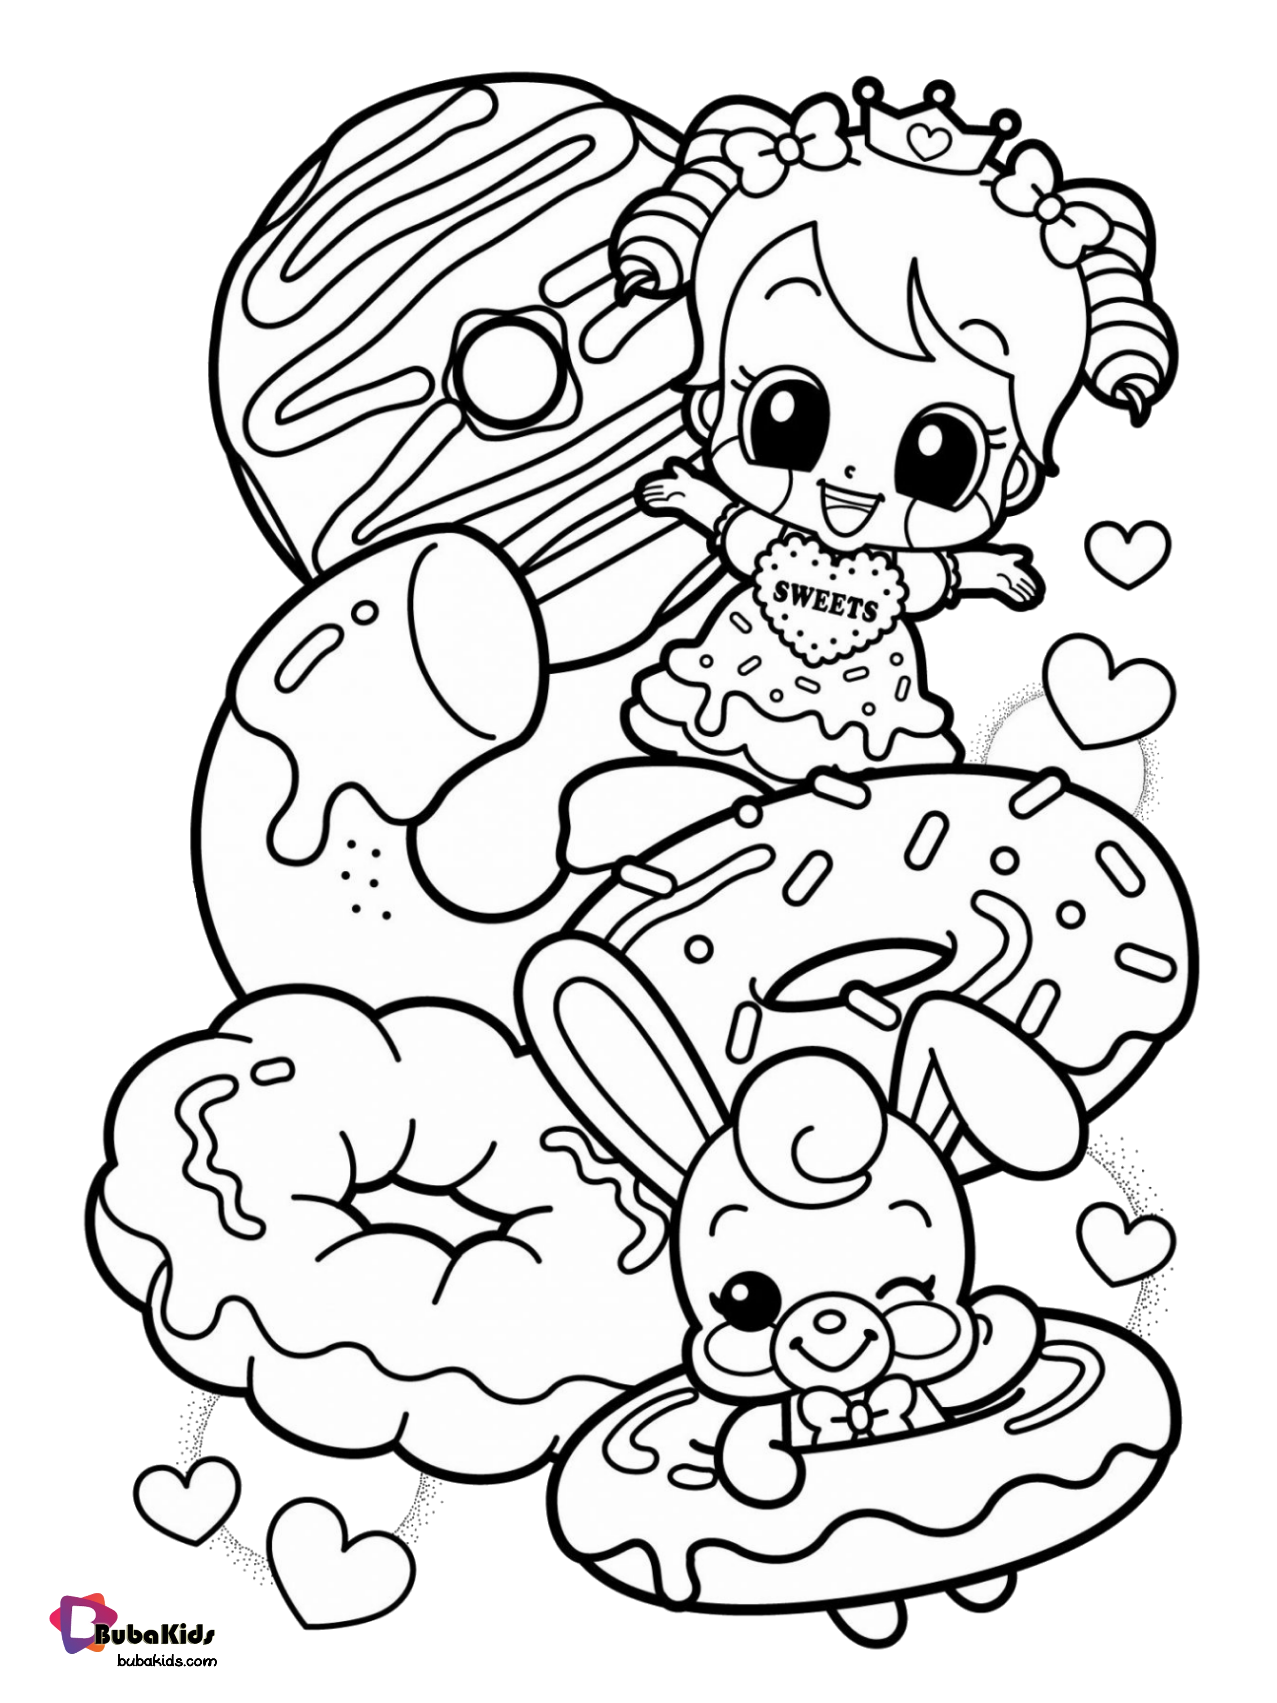 Food donuts coloring page Wallpaper